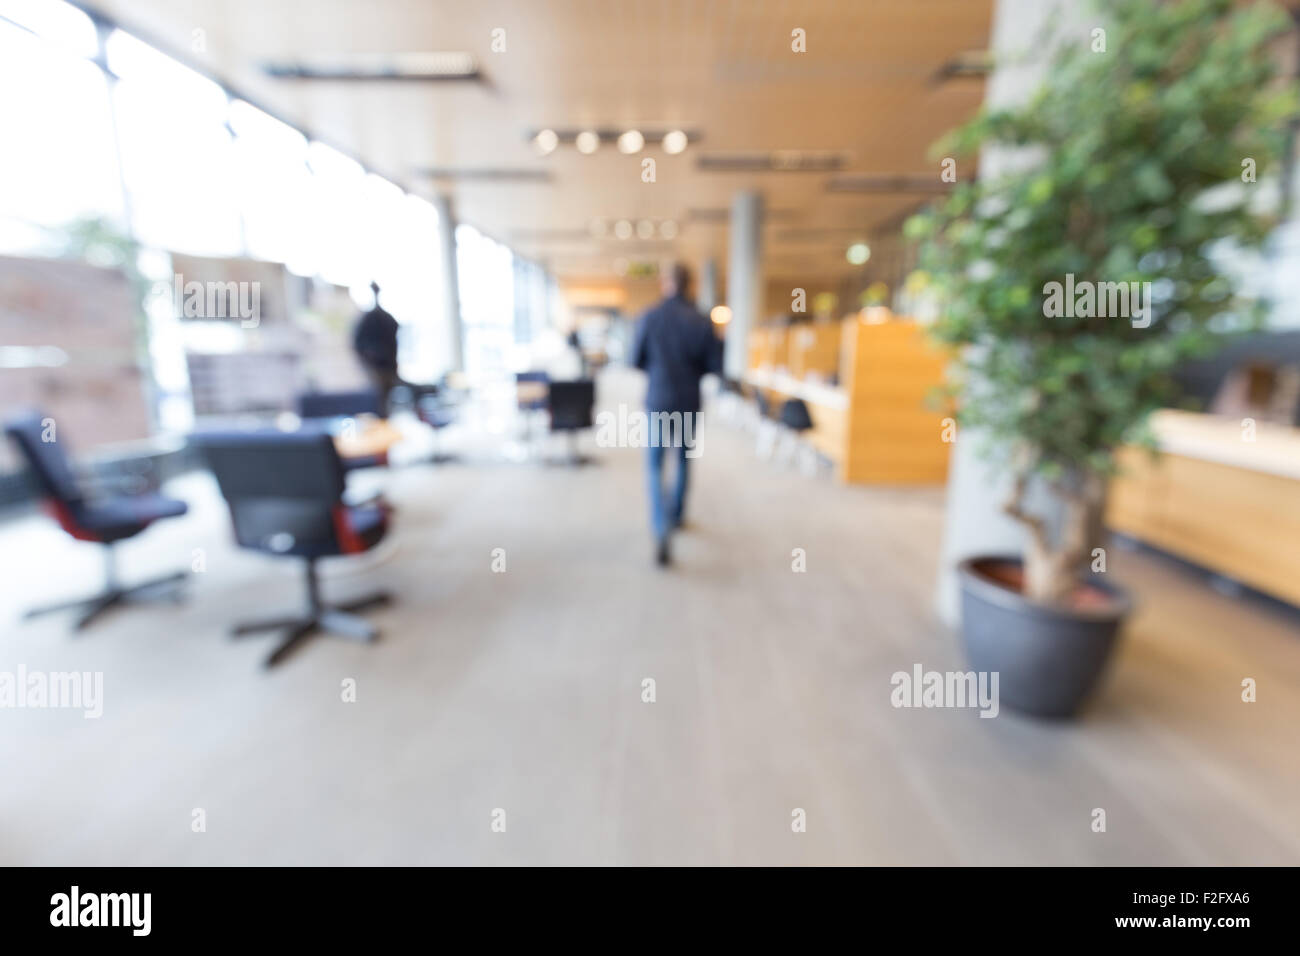 Out of focus shot of a man walking into a generic service center Stock Photo